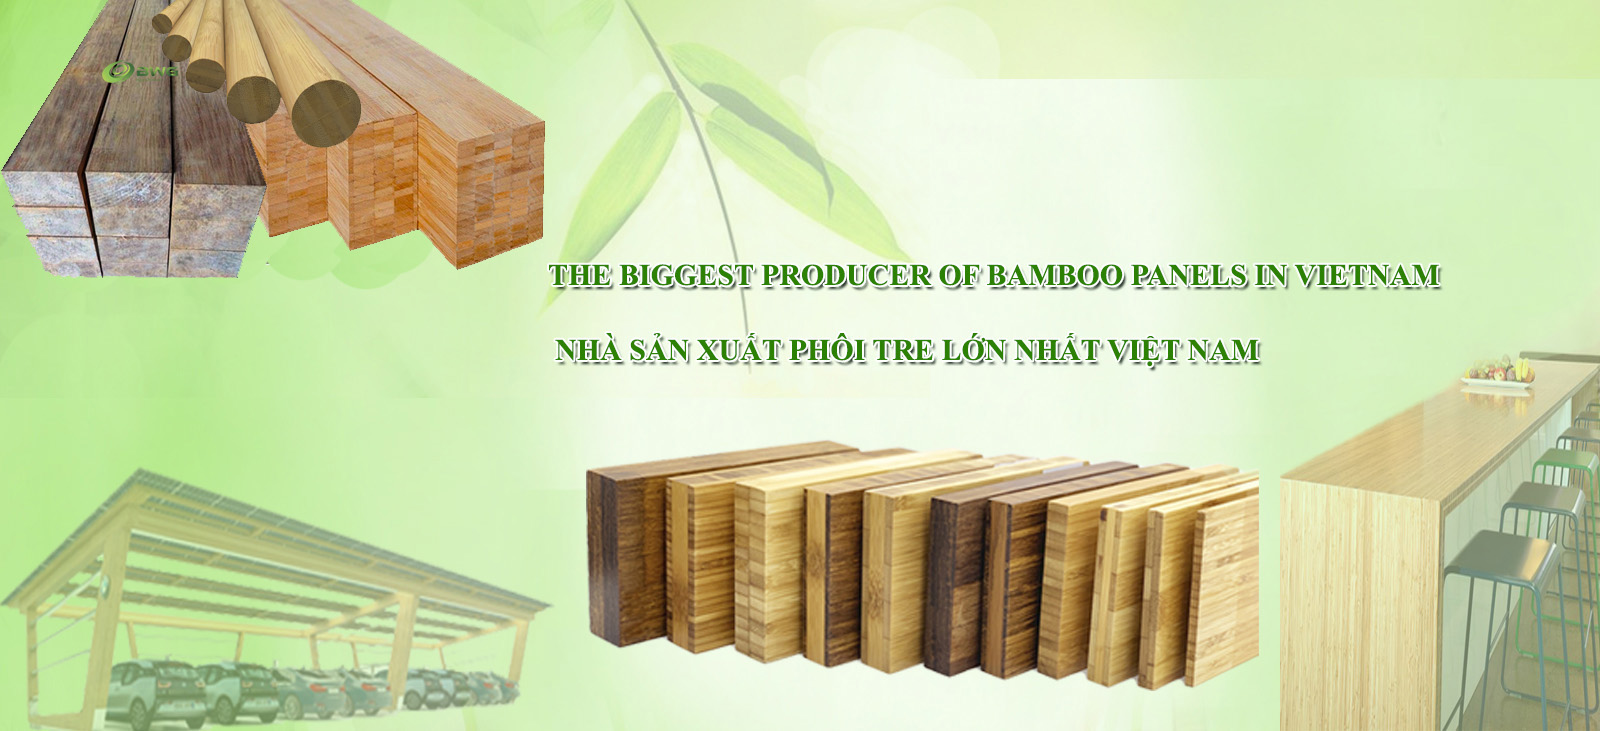 Biggest Bamboo panels producer in Vietnam